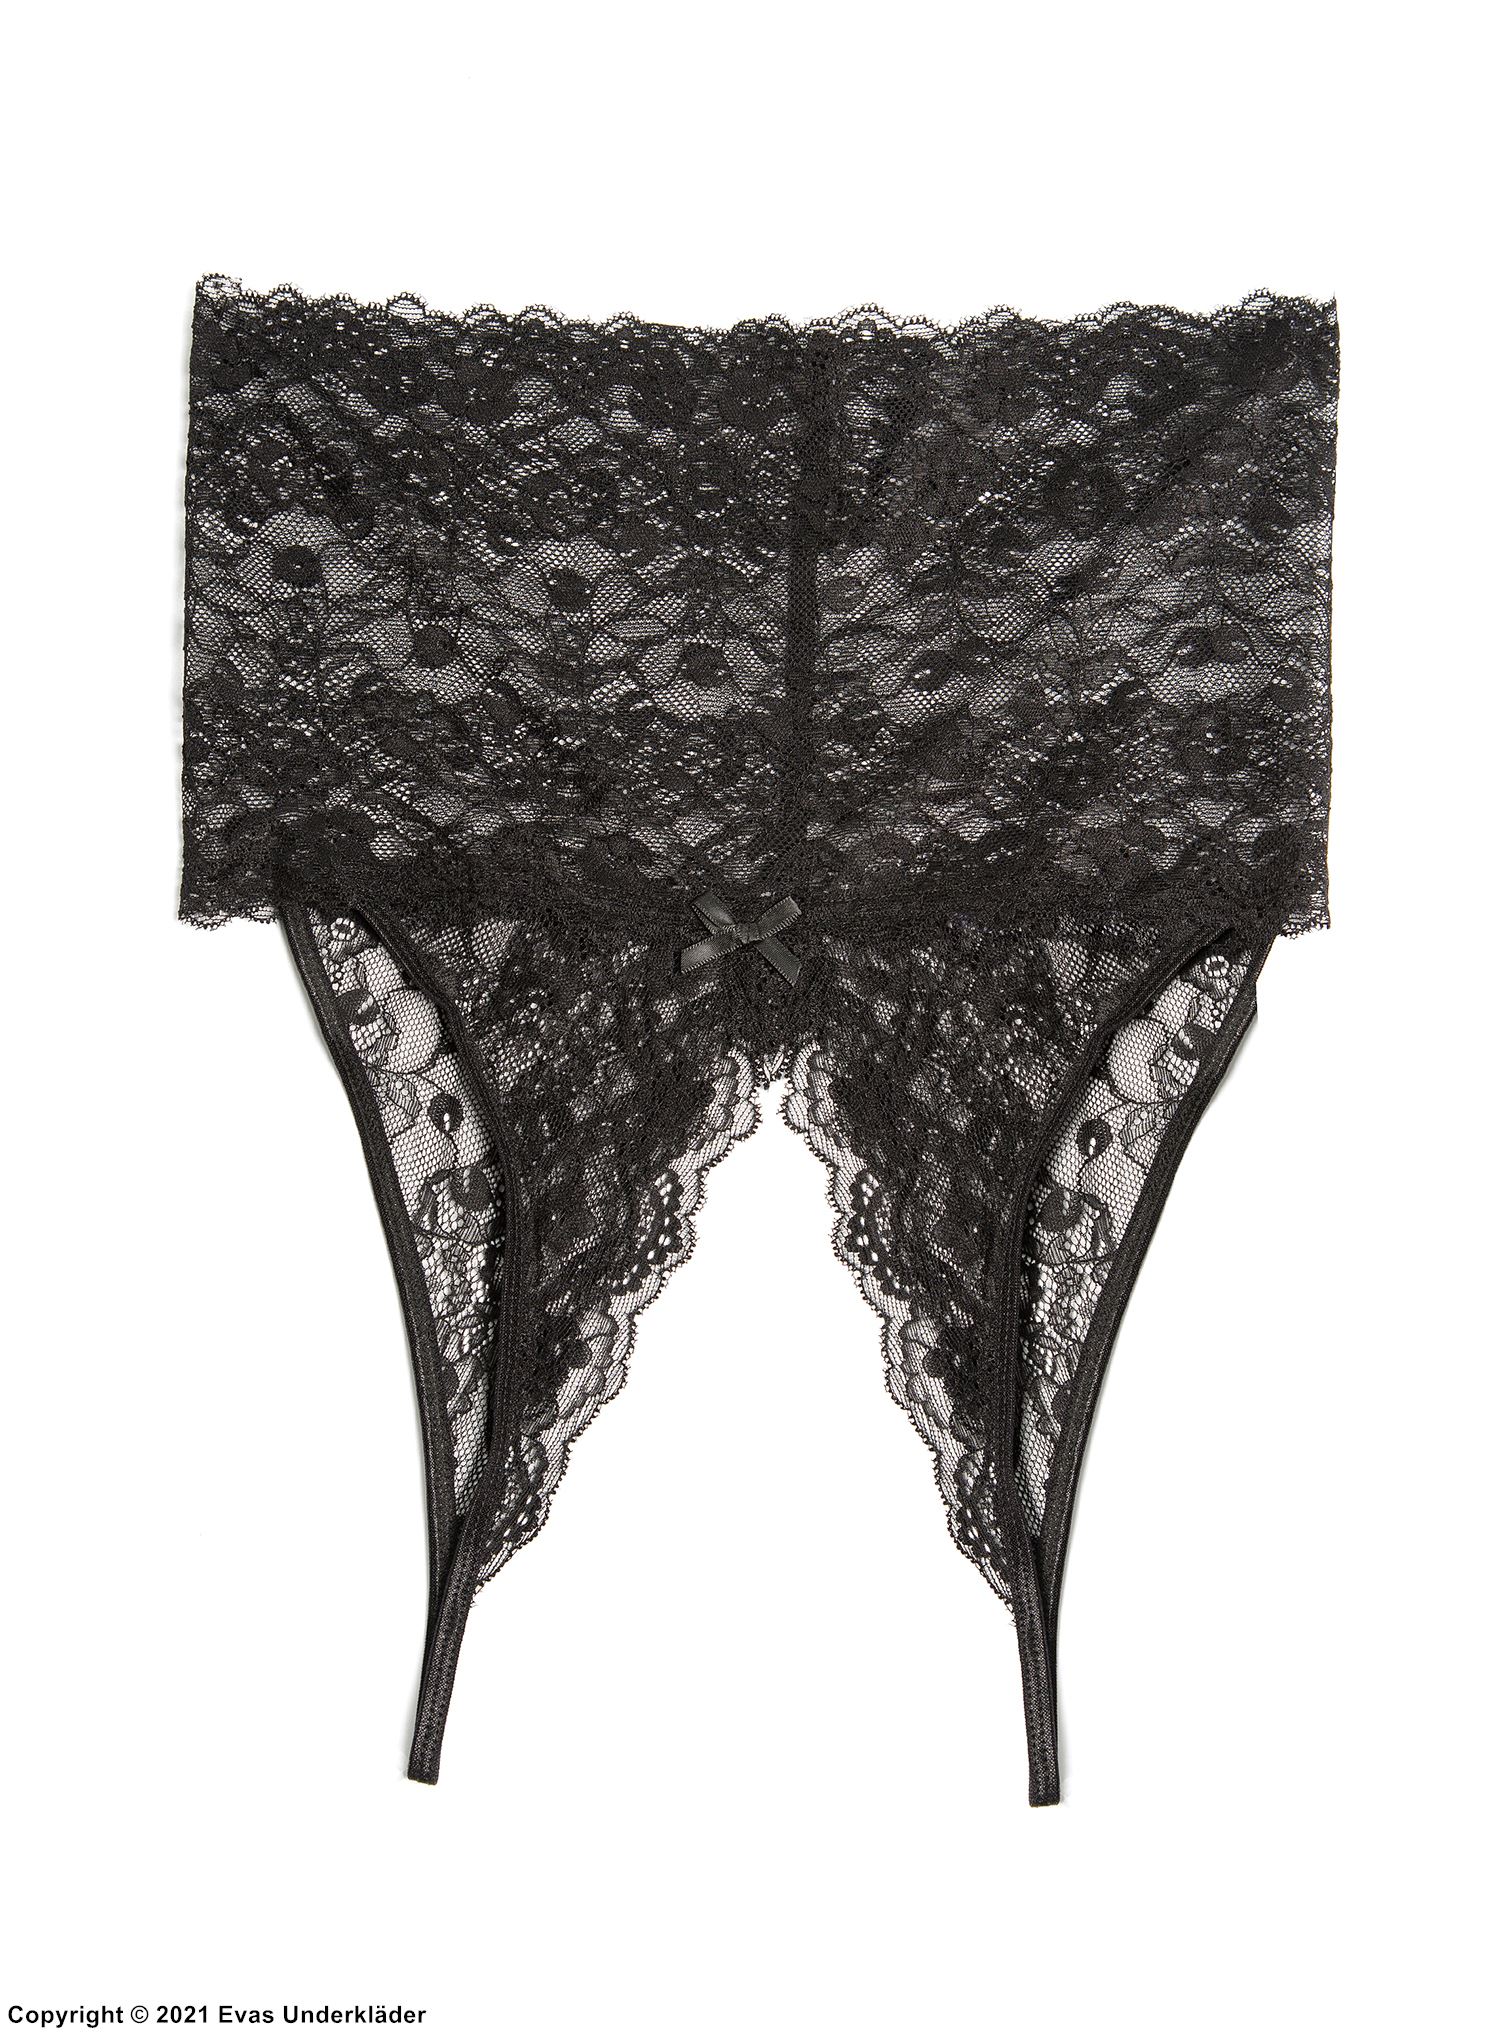 Crotchless panties, stretch lace, high waist